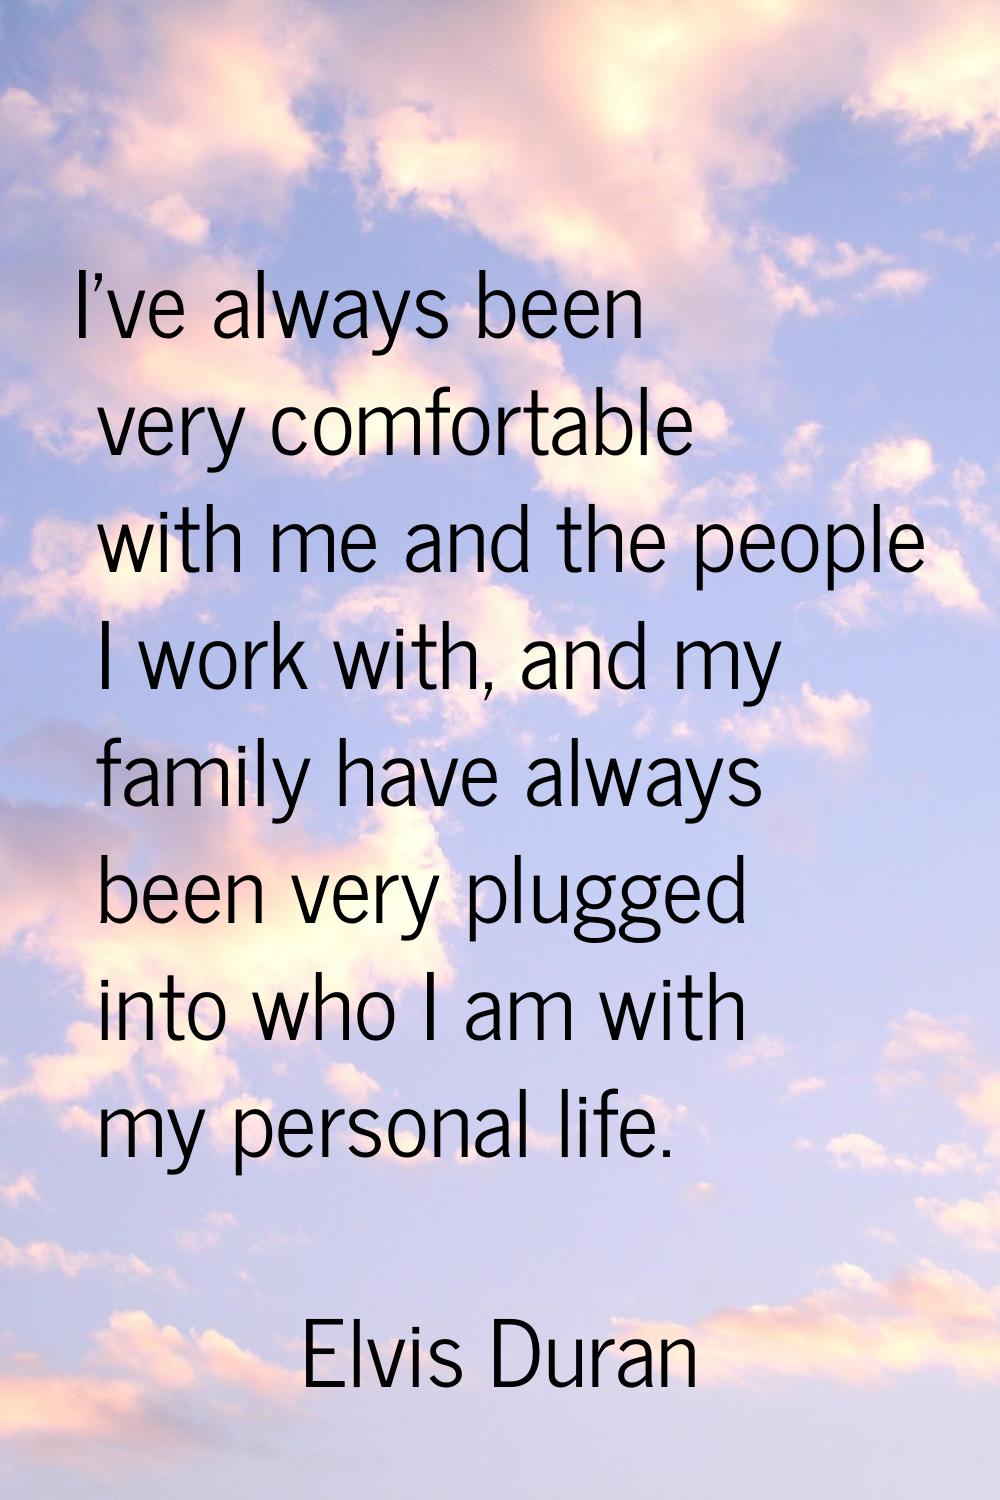 I've always been very comfortable with me and the people I work with, and my family have always bee